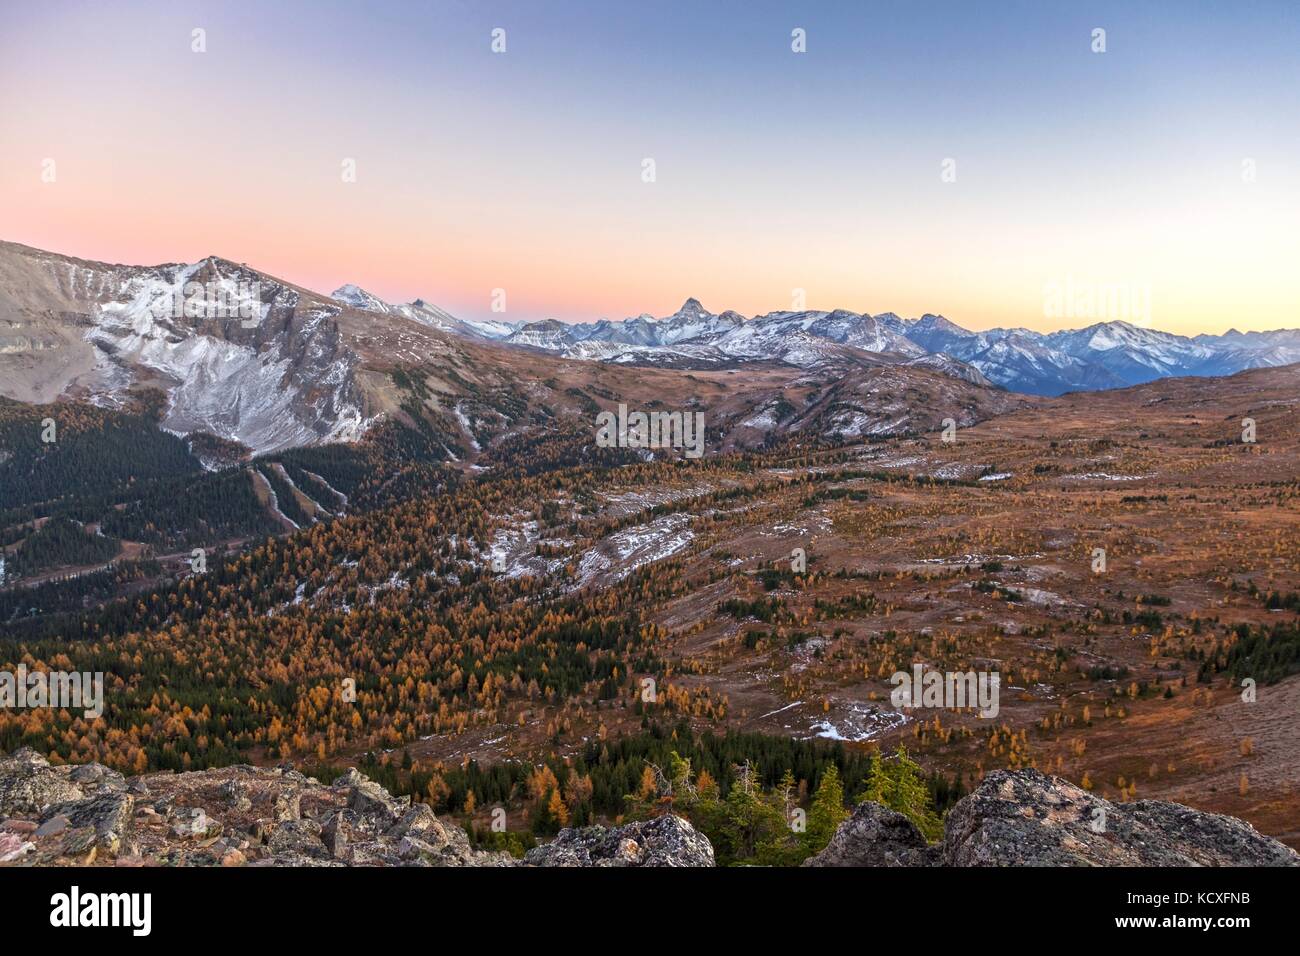 Autumn Sunset Landscape Panoramic View of Sunshine Meadows and Distant Mount Assiniboine in Banff National Park, Rocky Mountains Alberta Canada Stock Photo